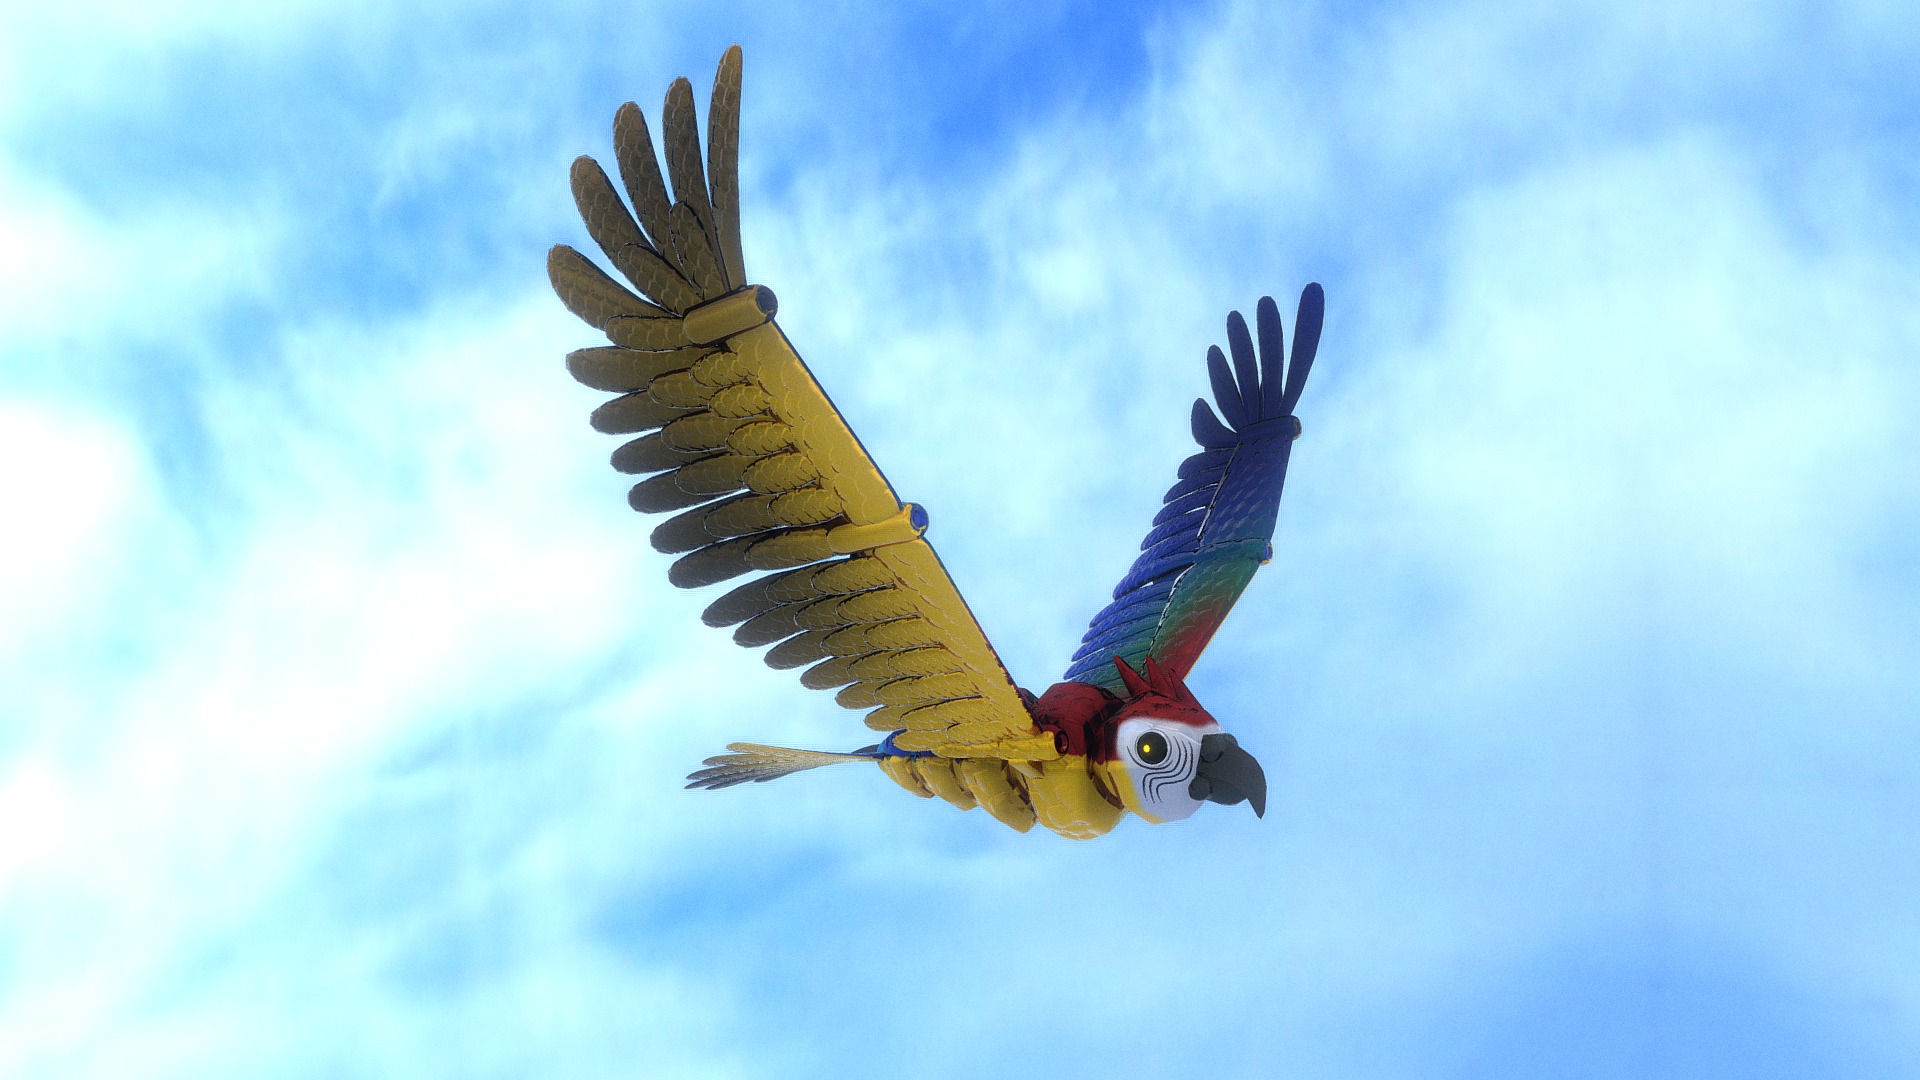 3D model MECH_PARROT_FLIGHT - This is a 3D model of the MECH_PARROT_FLIGHT. The 3D model is about a bird flying in the sky.